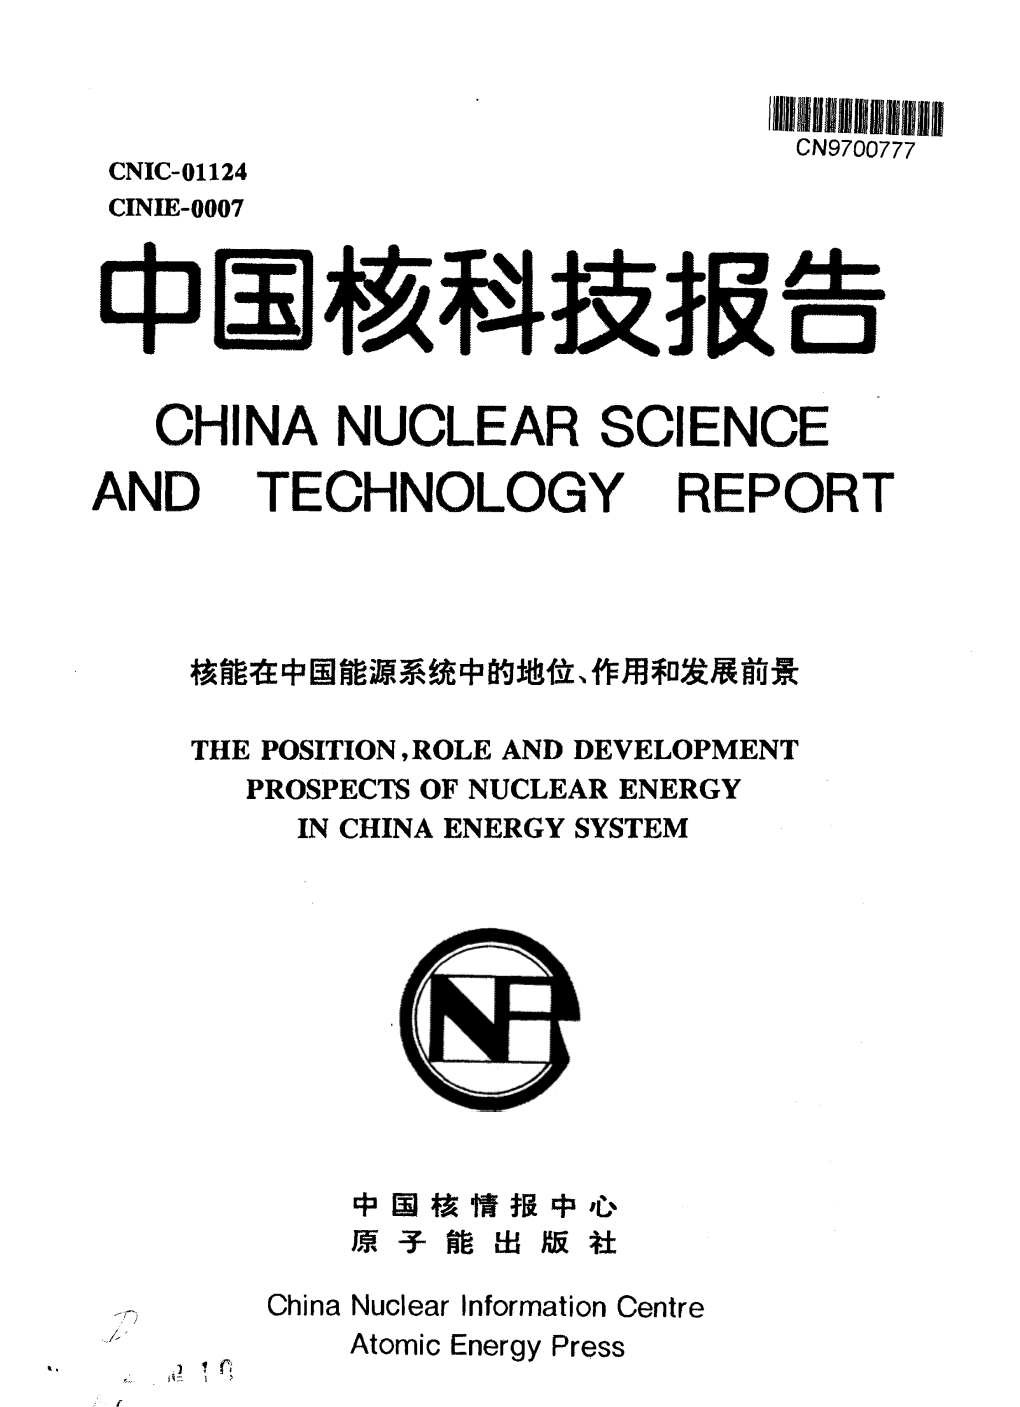 The Position, Role and Development Prospects of Nuclear Energy in China Energy System